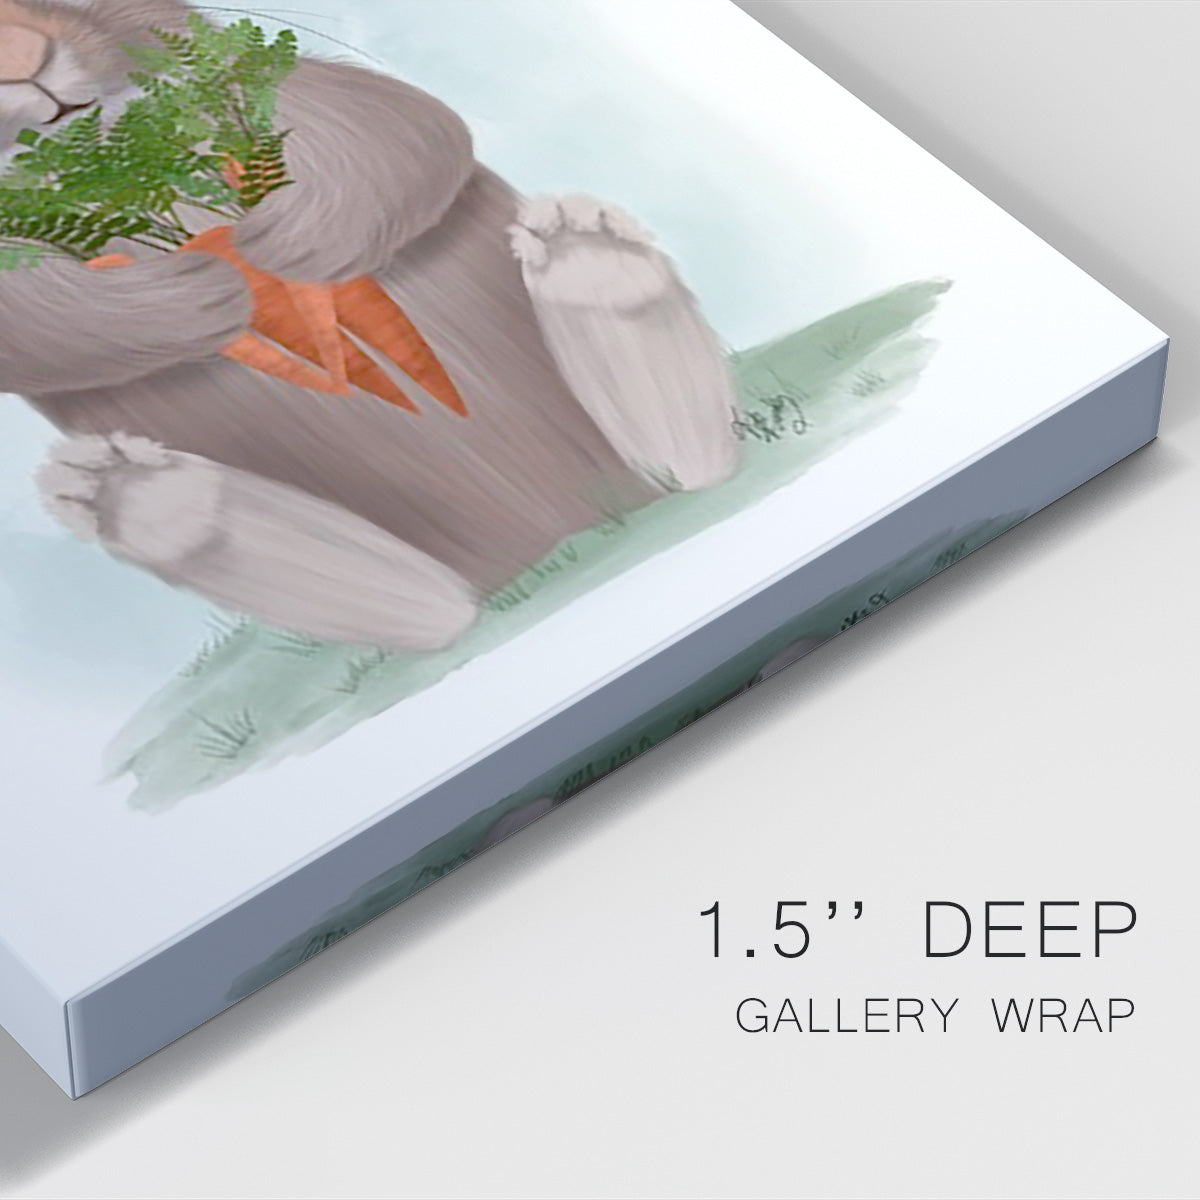 Rabbit Carrot Hug Premium Gallery Wrapped Canvas - Ready to Hang